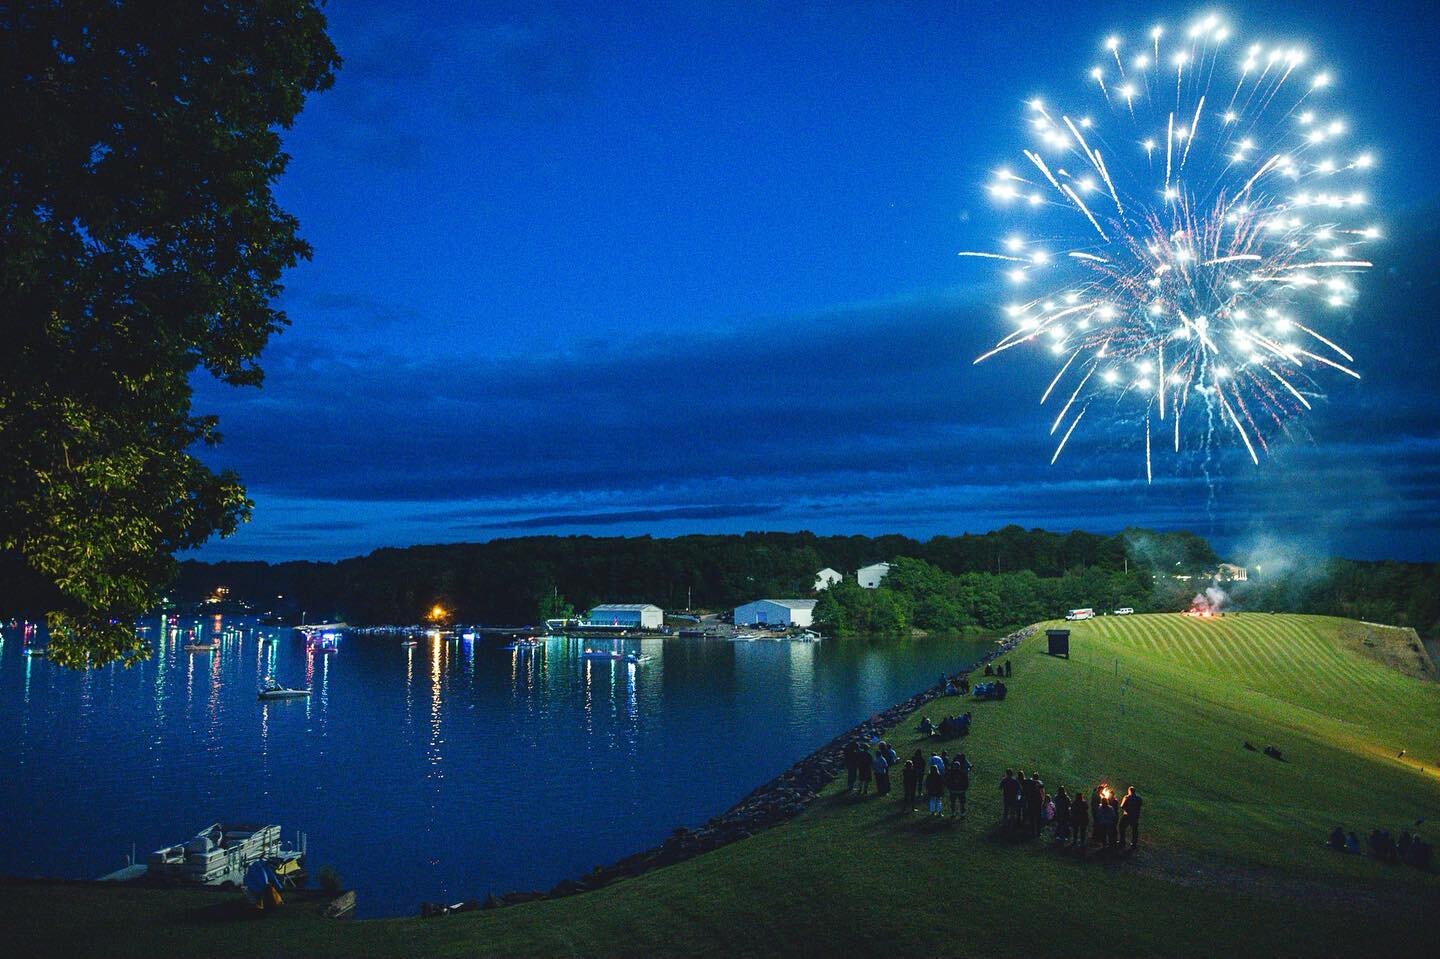 Beautiful firework display at Indian Lake this Fourth of July weekend. ❤️💙💥#clickcommunityhunt21 #nightsky #july4th #fireworks #indianlakepa #indianlakemarina